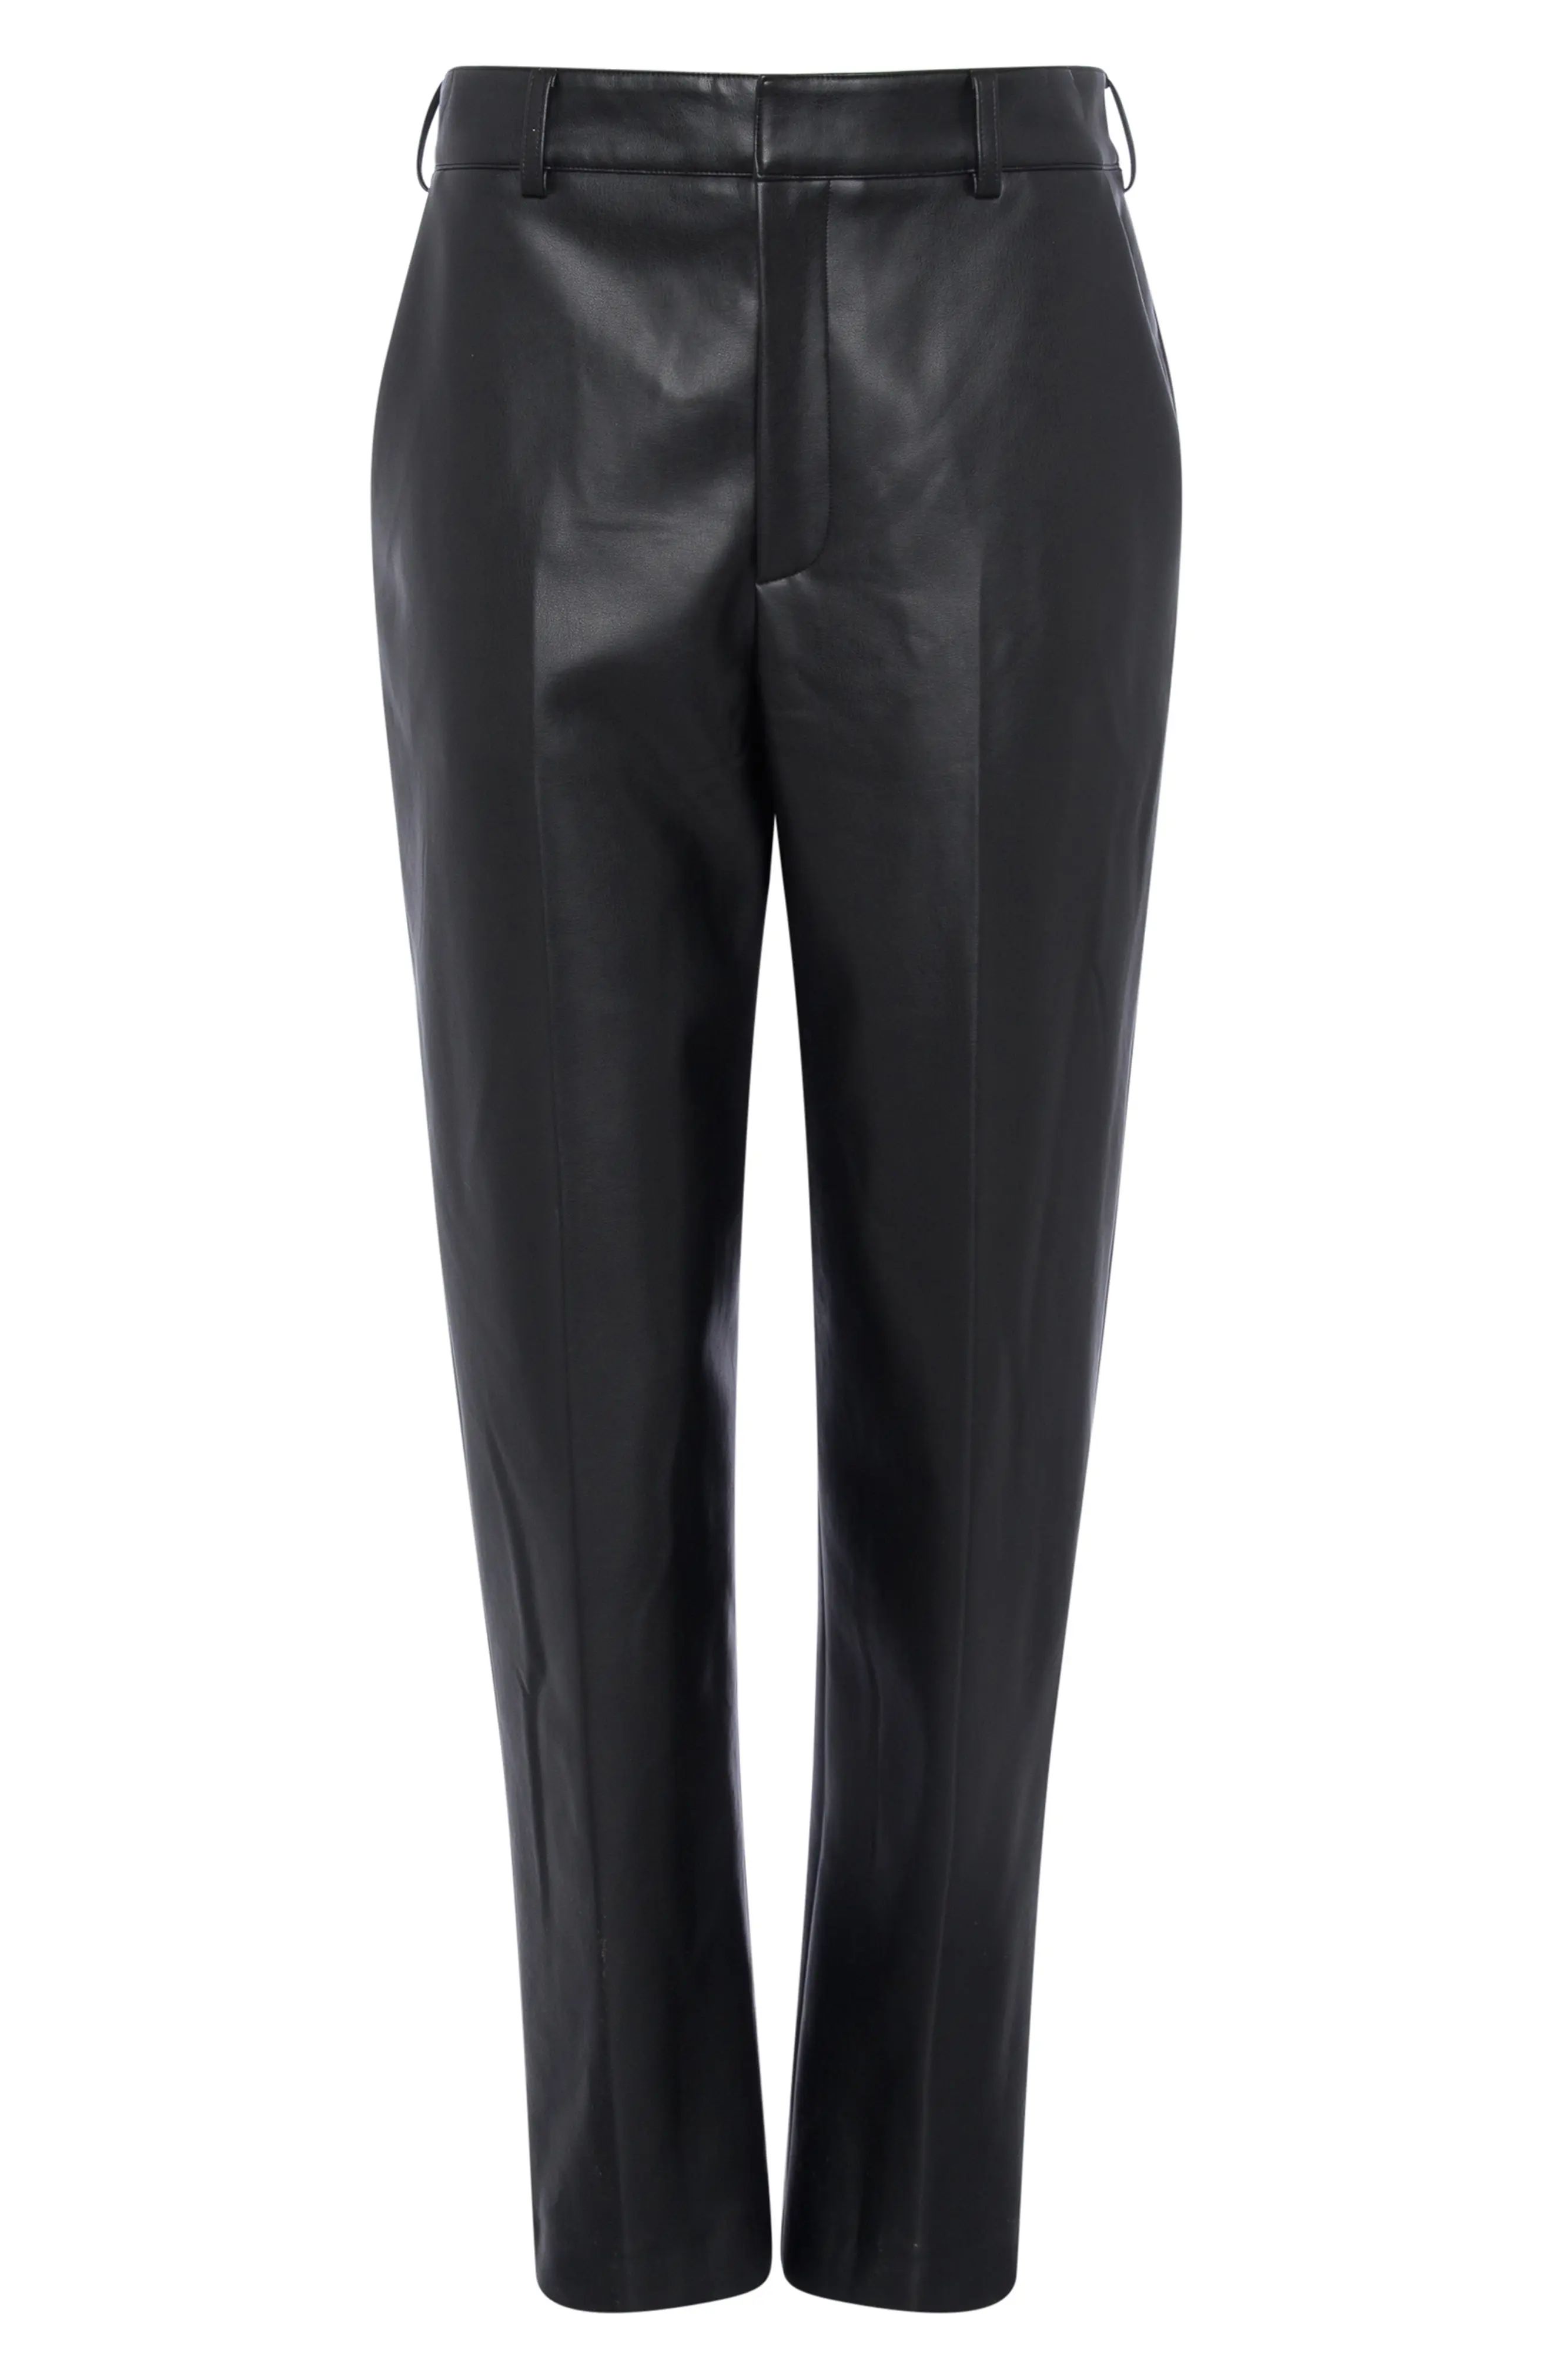 French Connection Crolenda Faux Leather Trousers, Size 8 in Black at Nordstrom | Nordstrom